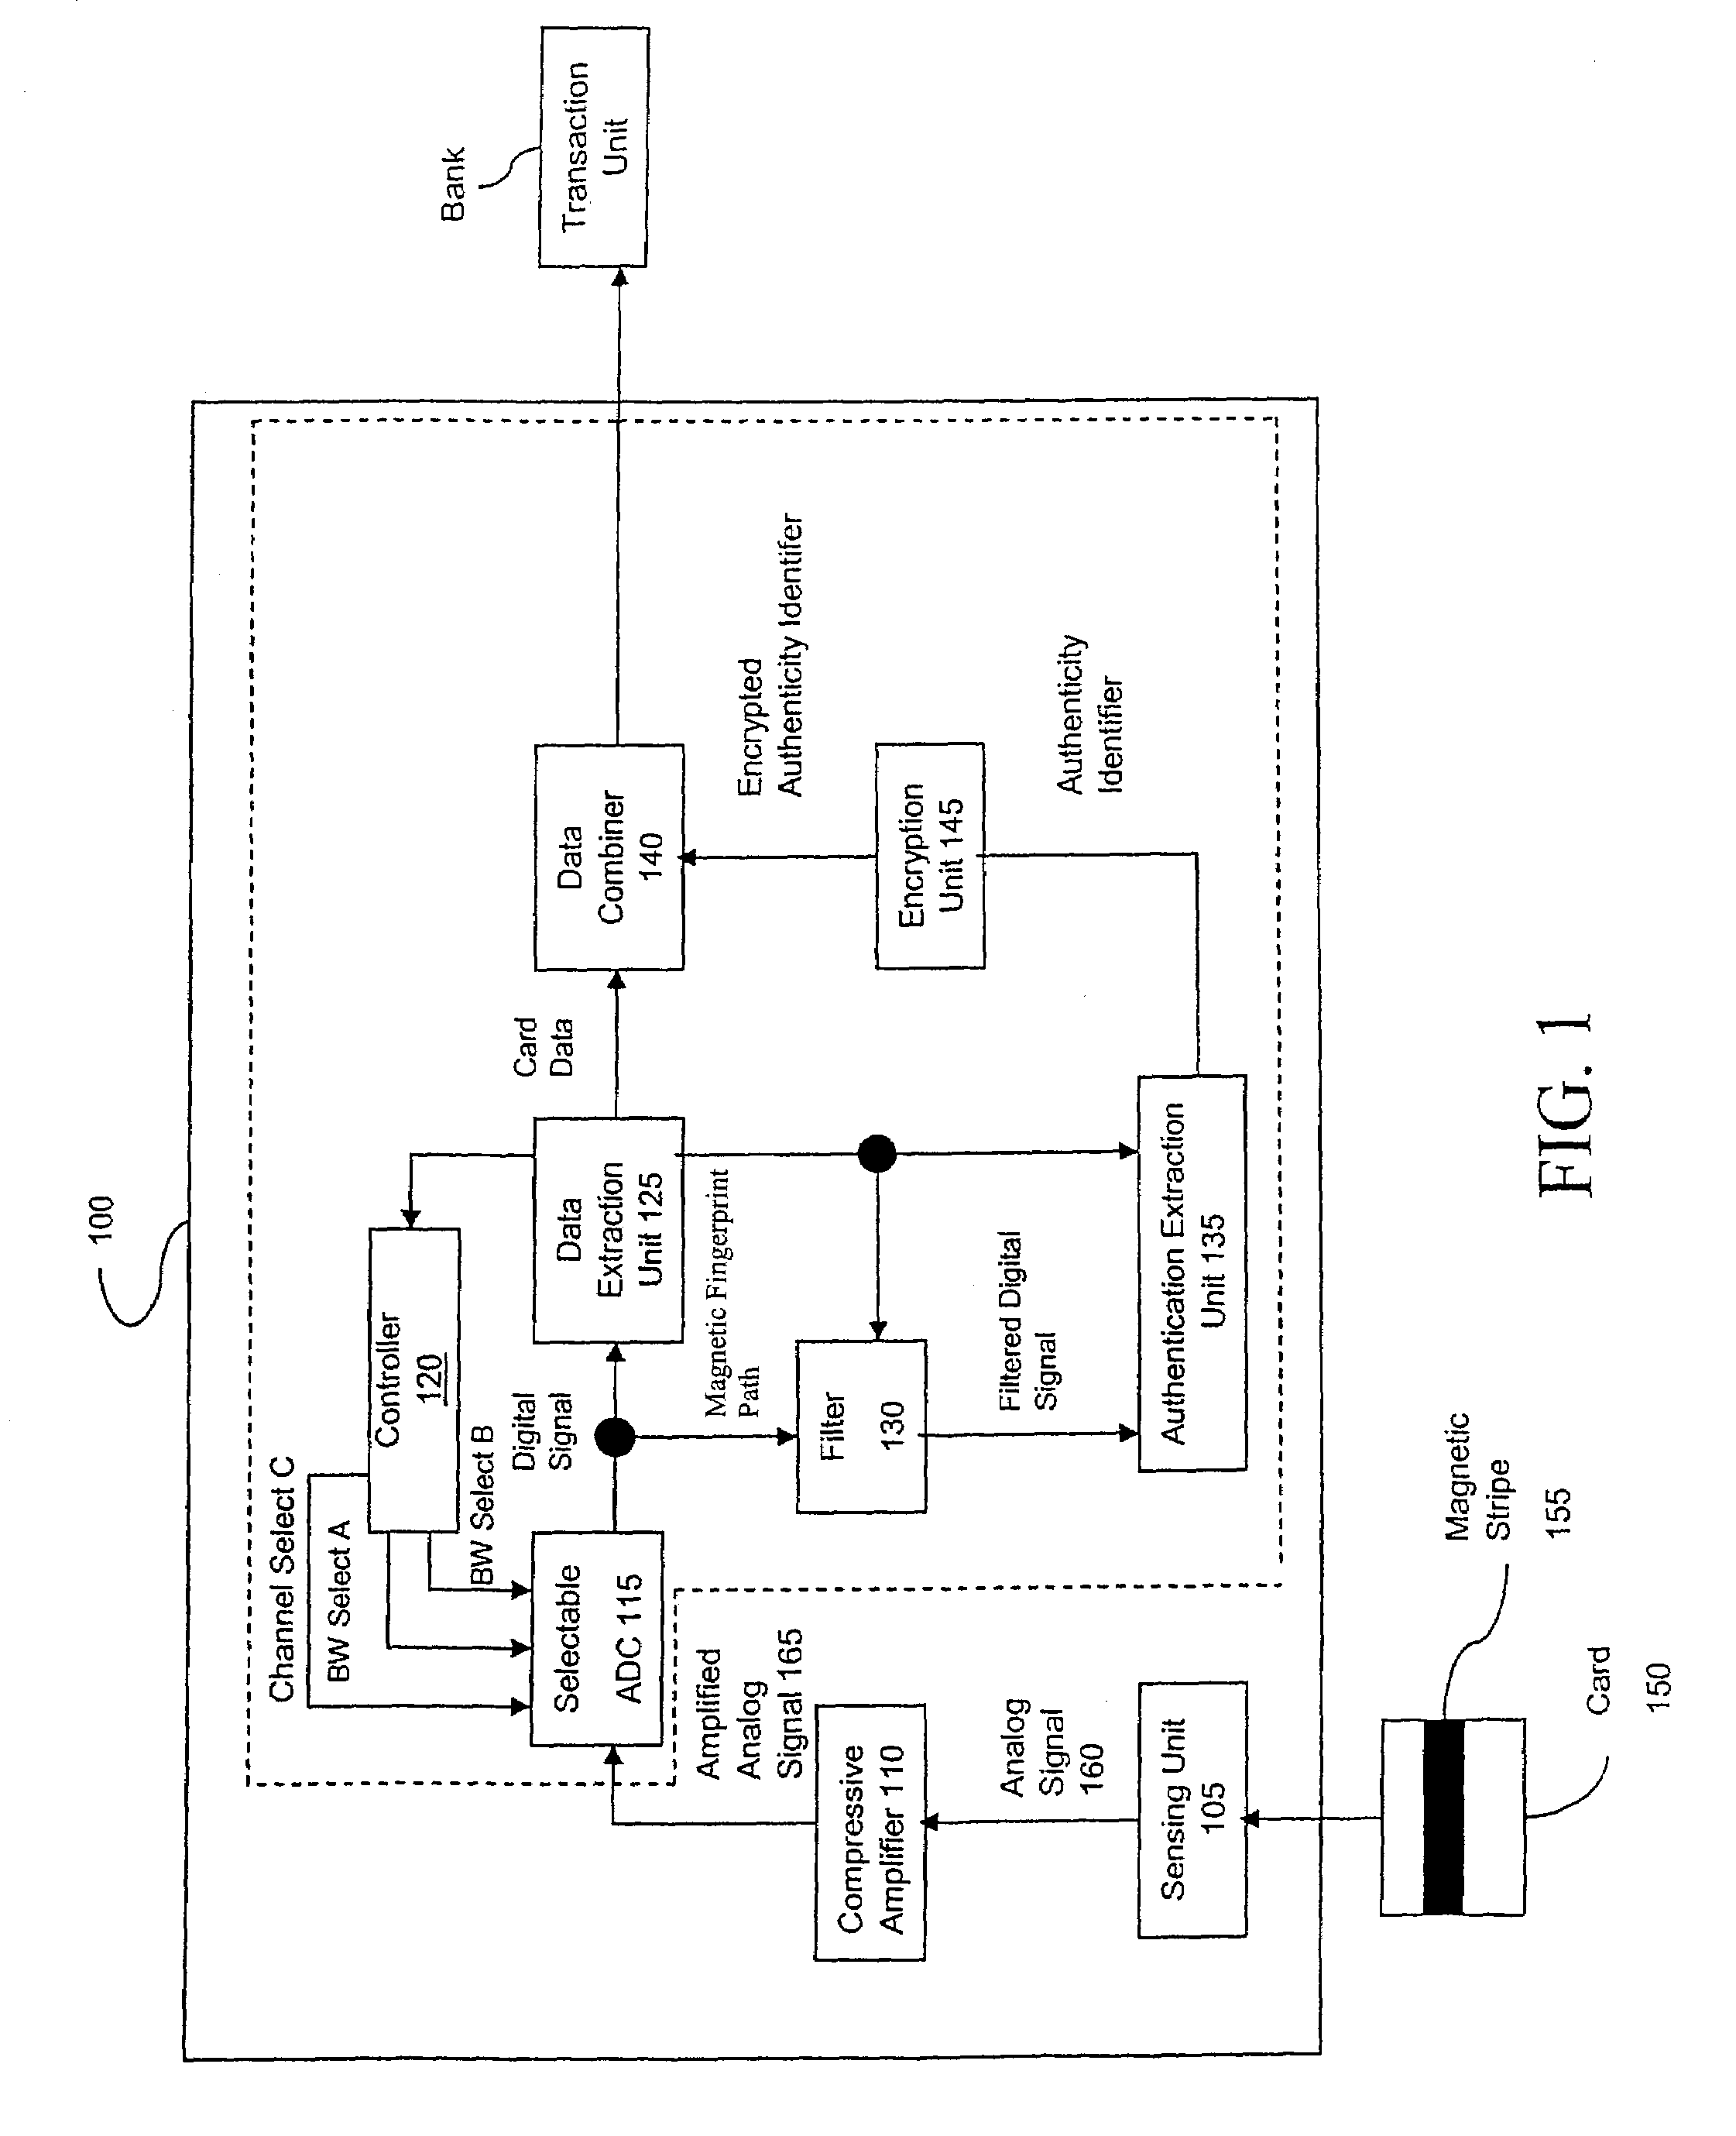 Method and apparatus for authenticating a magnetic fingerprint signal using compressive amplification